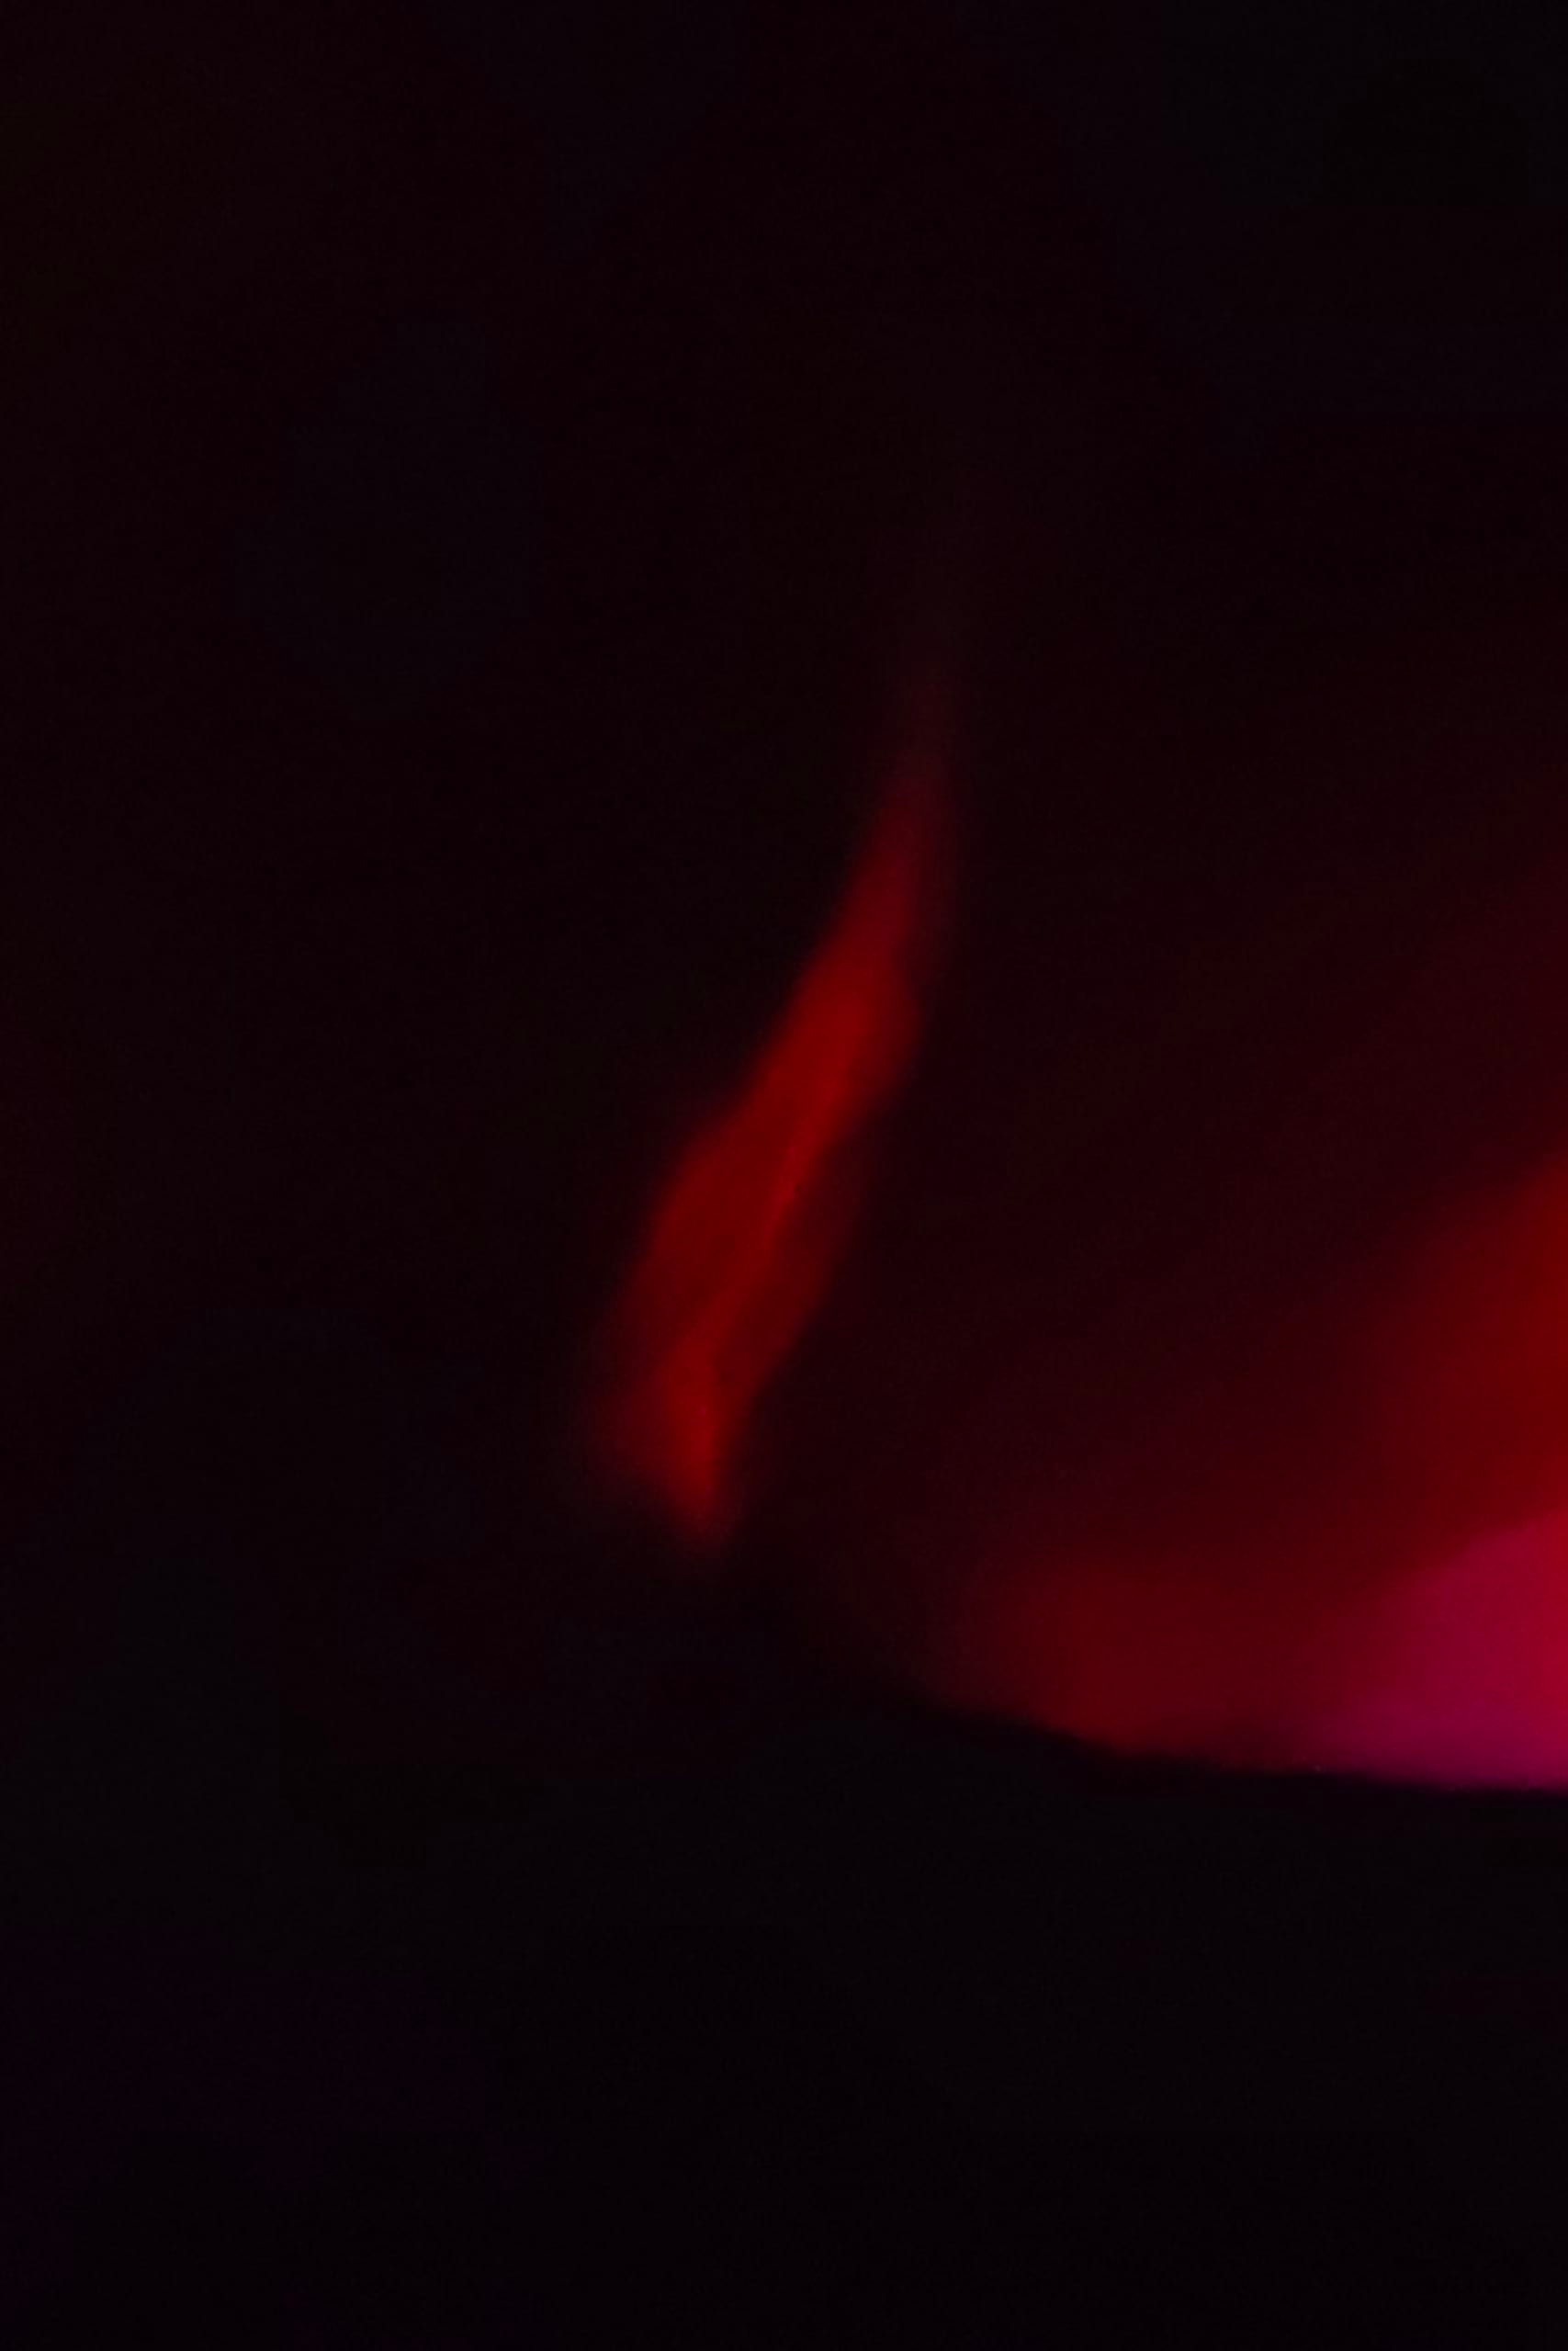 Image of a dark red flame-like shape in a black background.